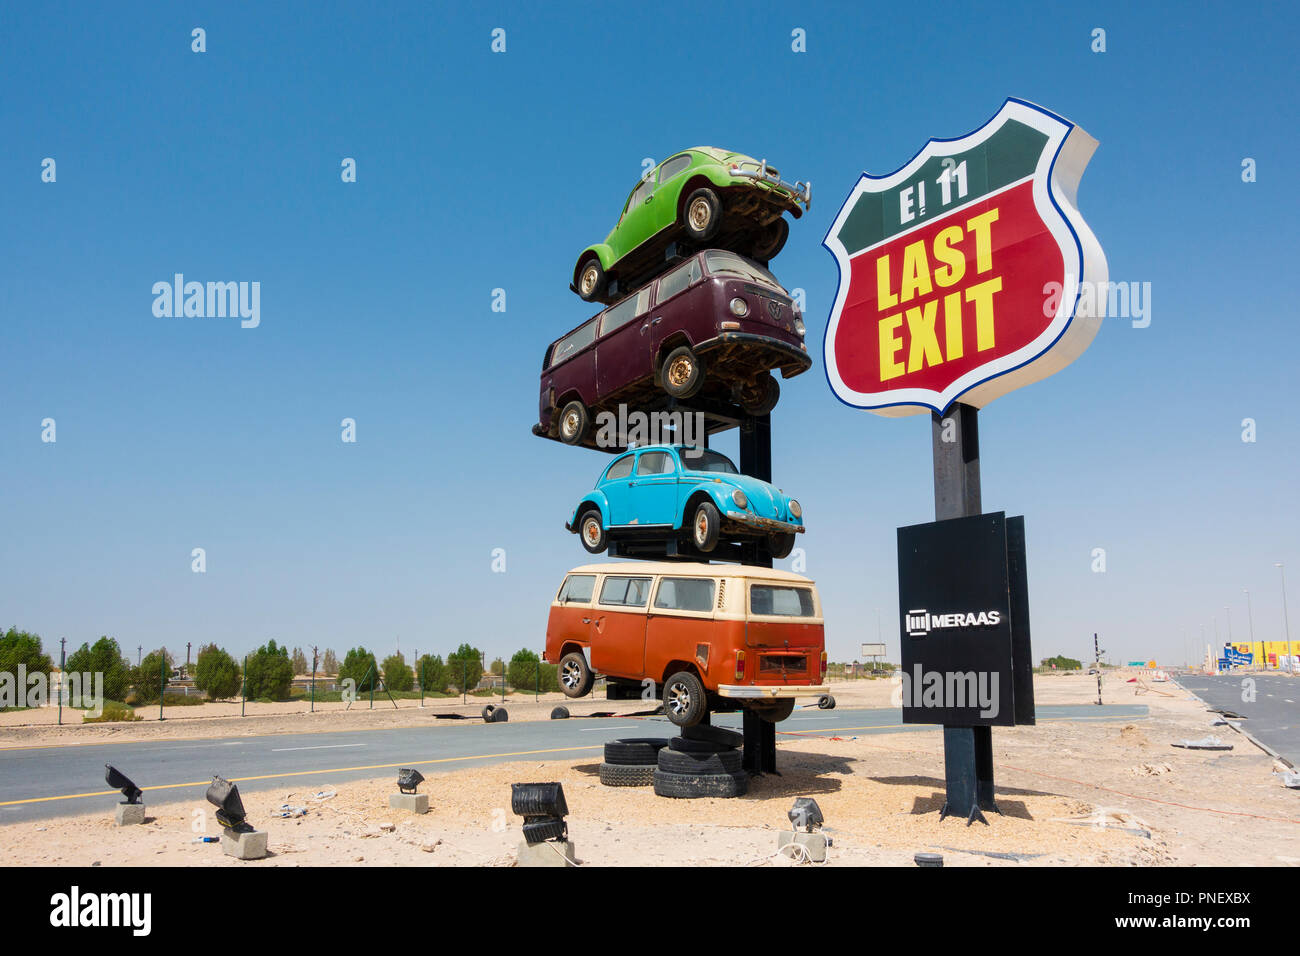 View of Last Exit an American themed drive-thru fast food highway service stop on E11 expressway between Abu Dhabi and Dubai, UAE, United Arab Emirate Stock Photo